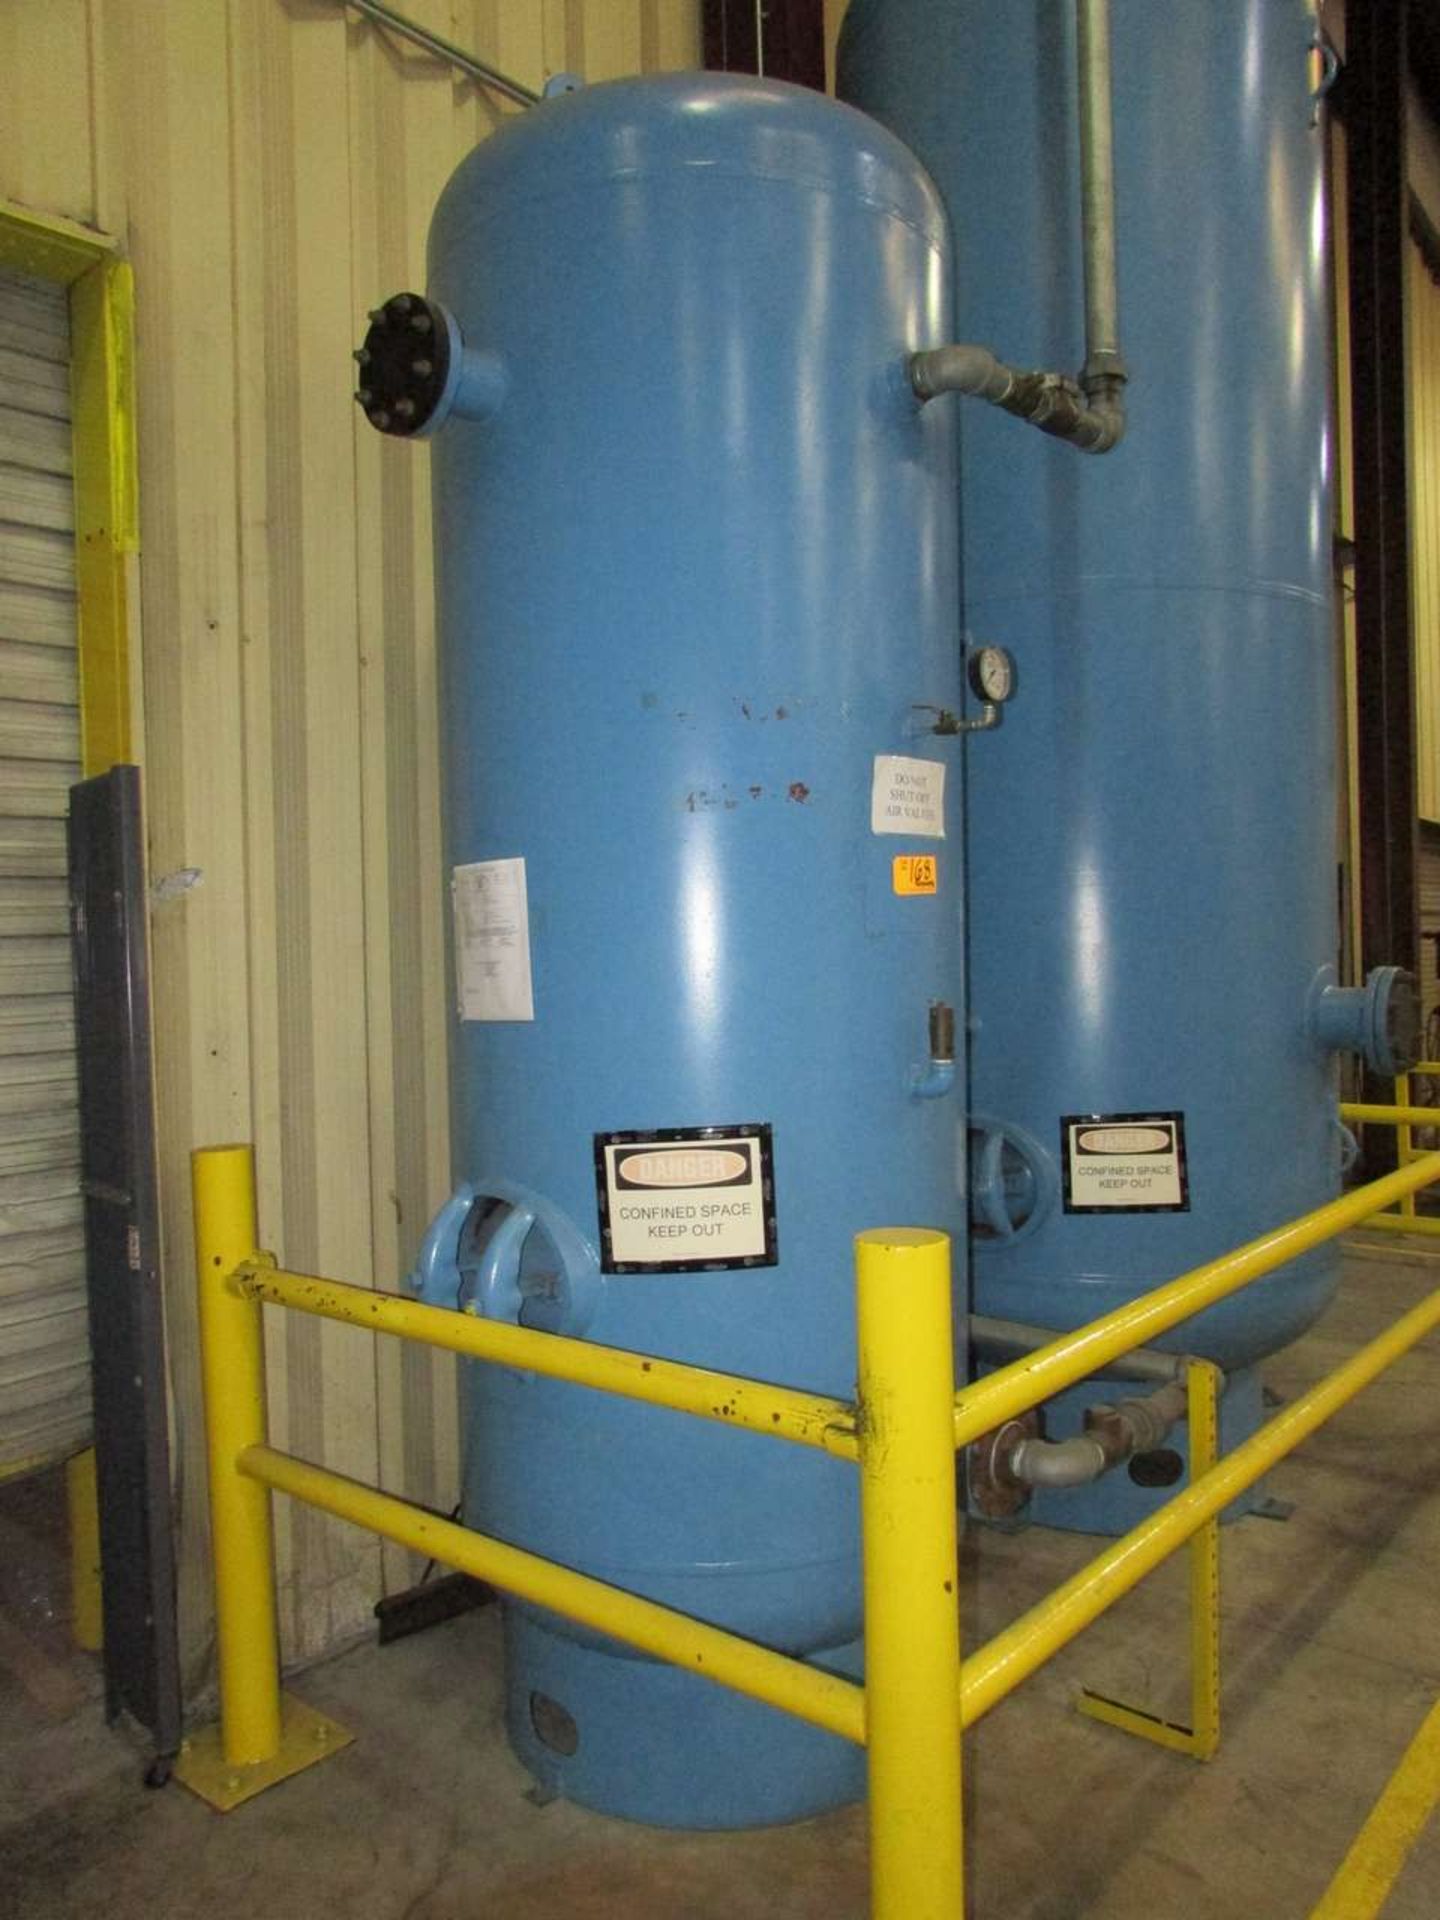 1997 Compressed Air Receiving Tank - Image 2 of 2